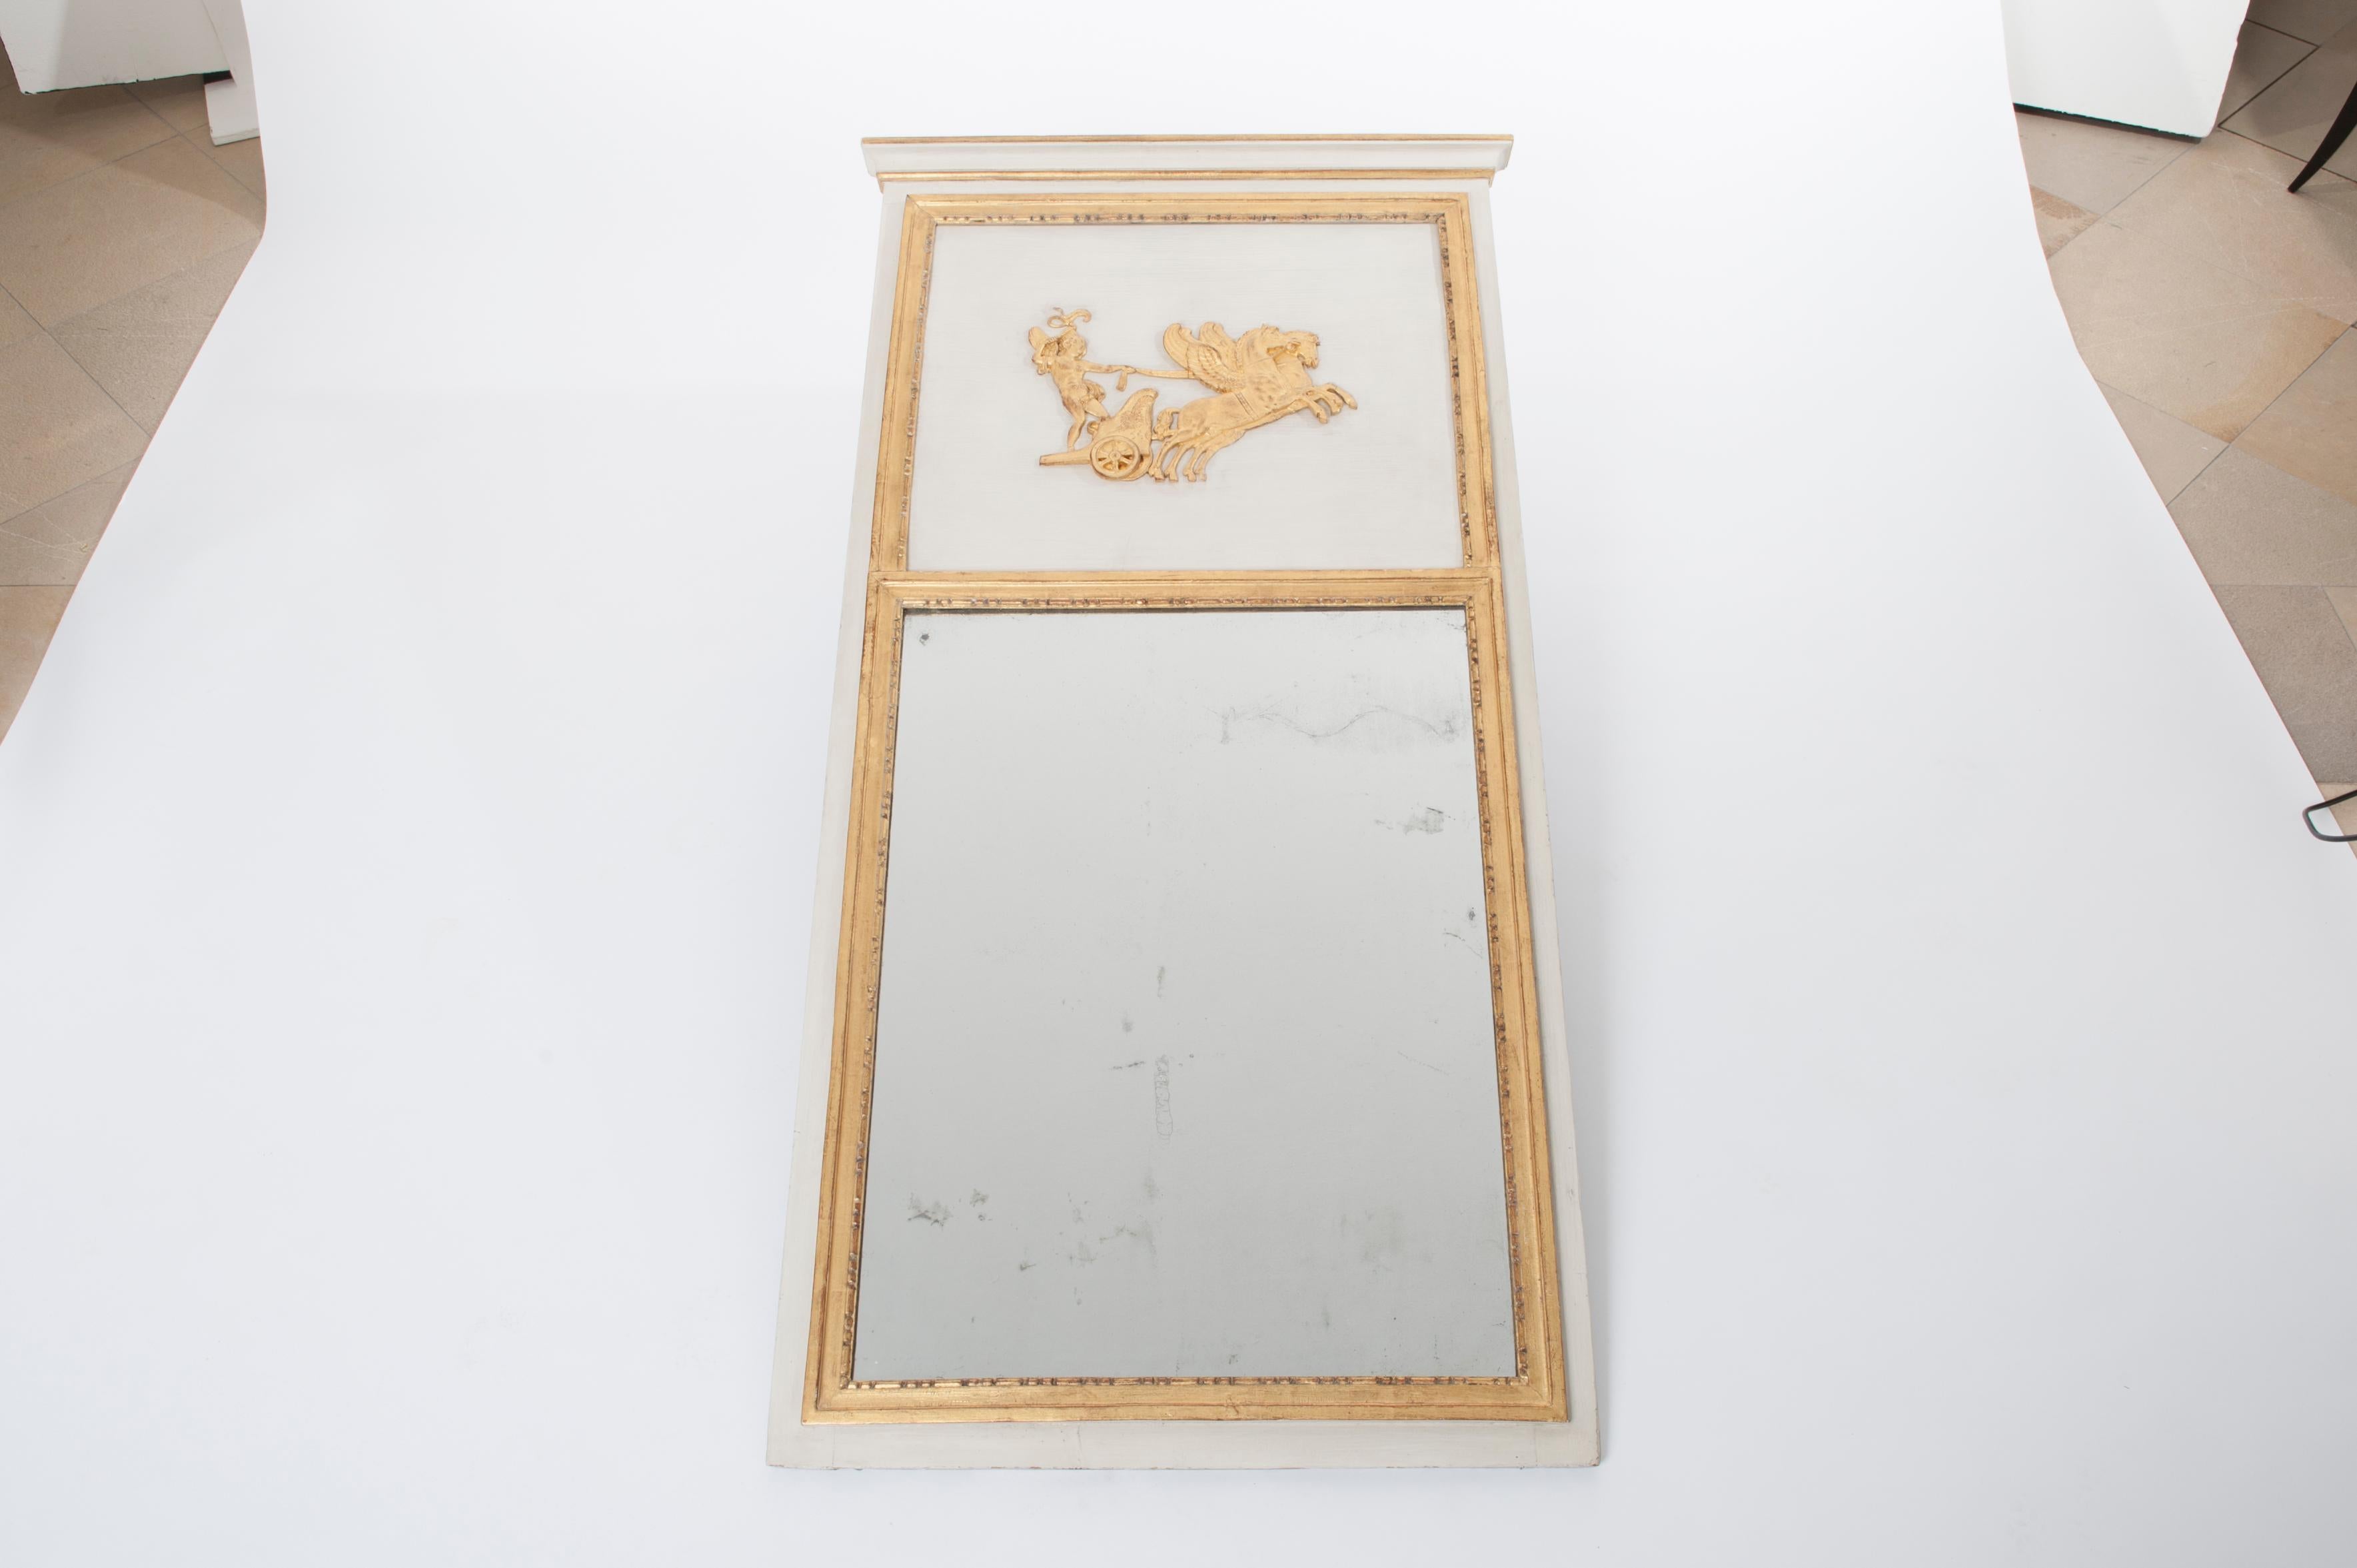 French, Classic Directoire Trumeau 18th century gold / white
Very fine representation of an antique chariot with handlebar.
Framed with pearl frieze decorated.
Original mirror mercury glass and wooden back.